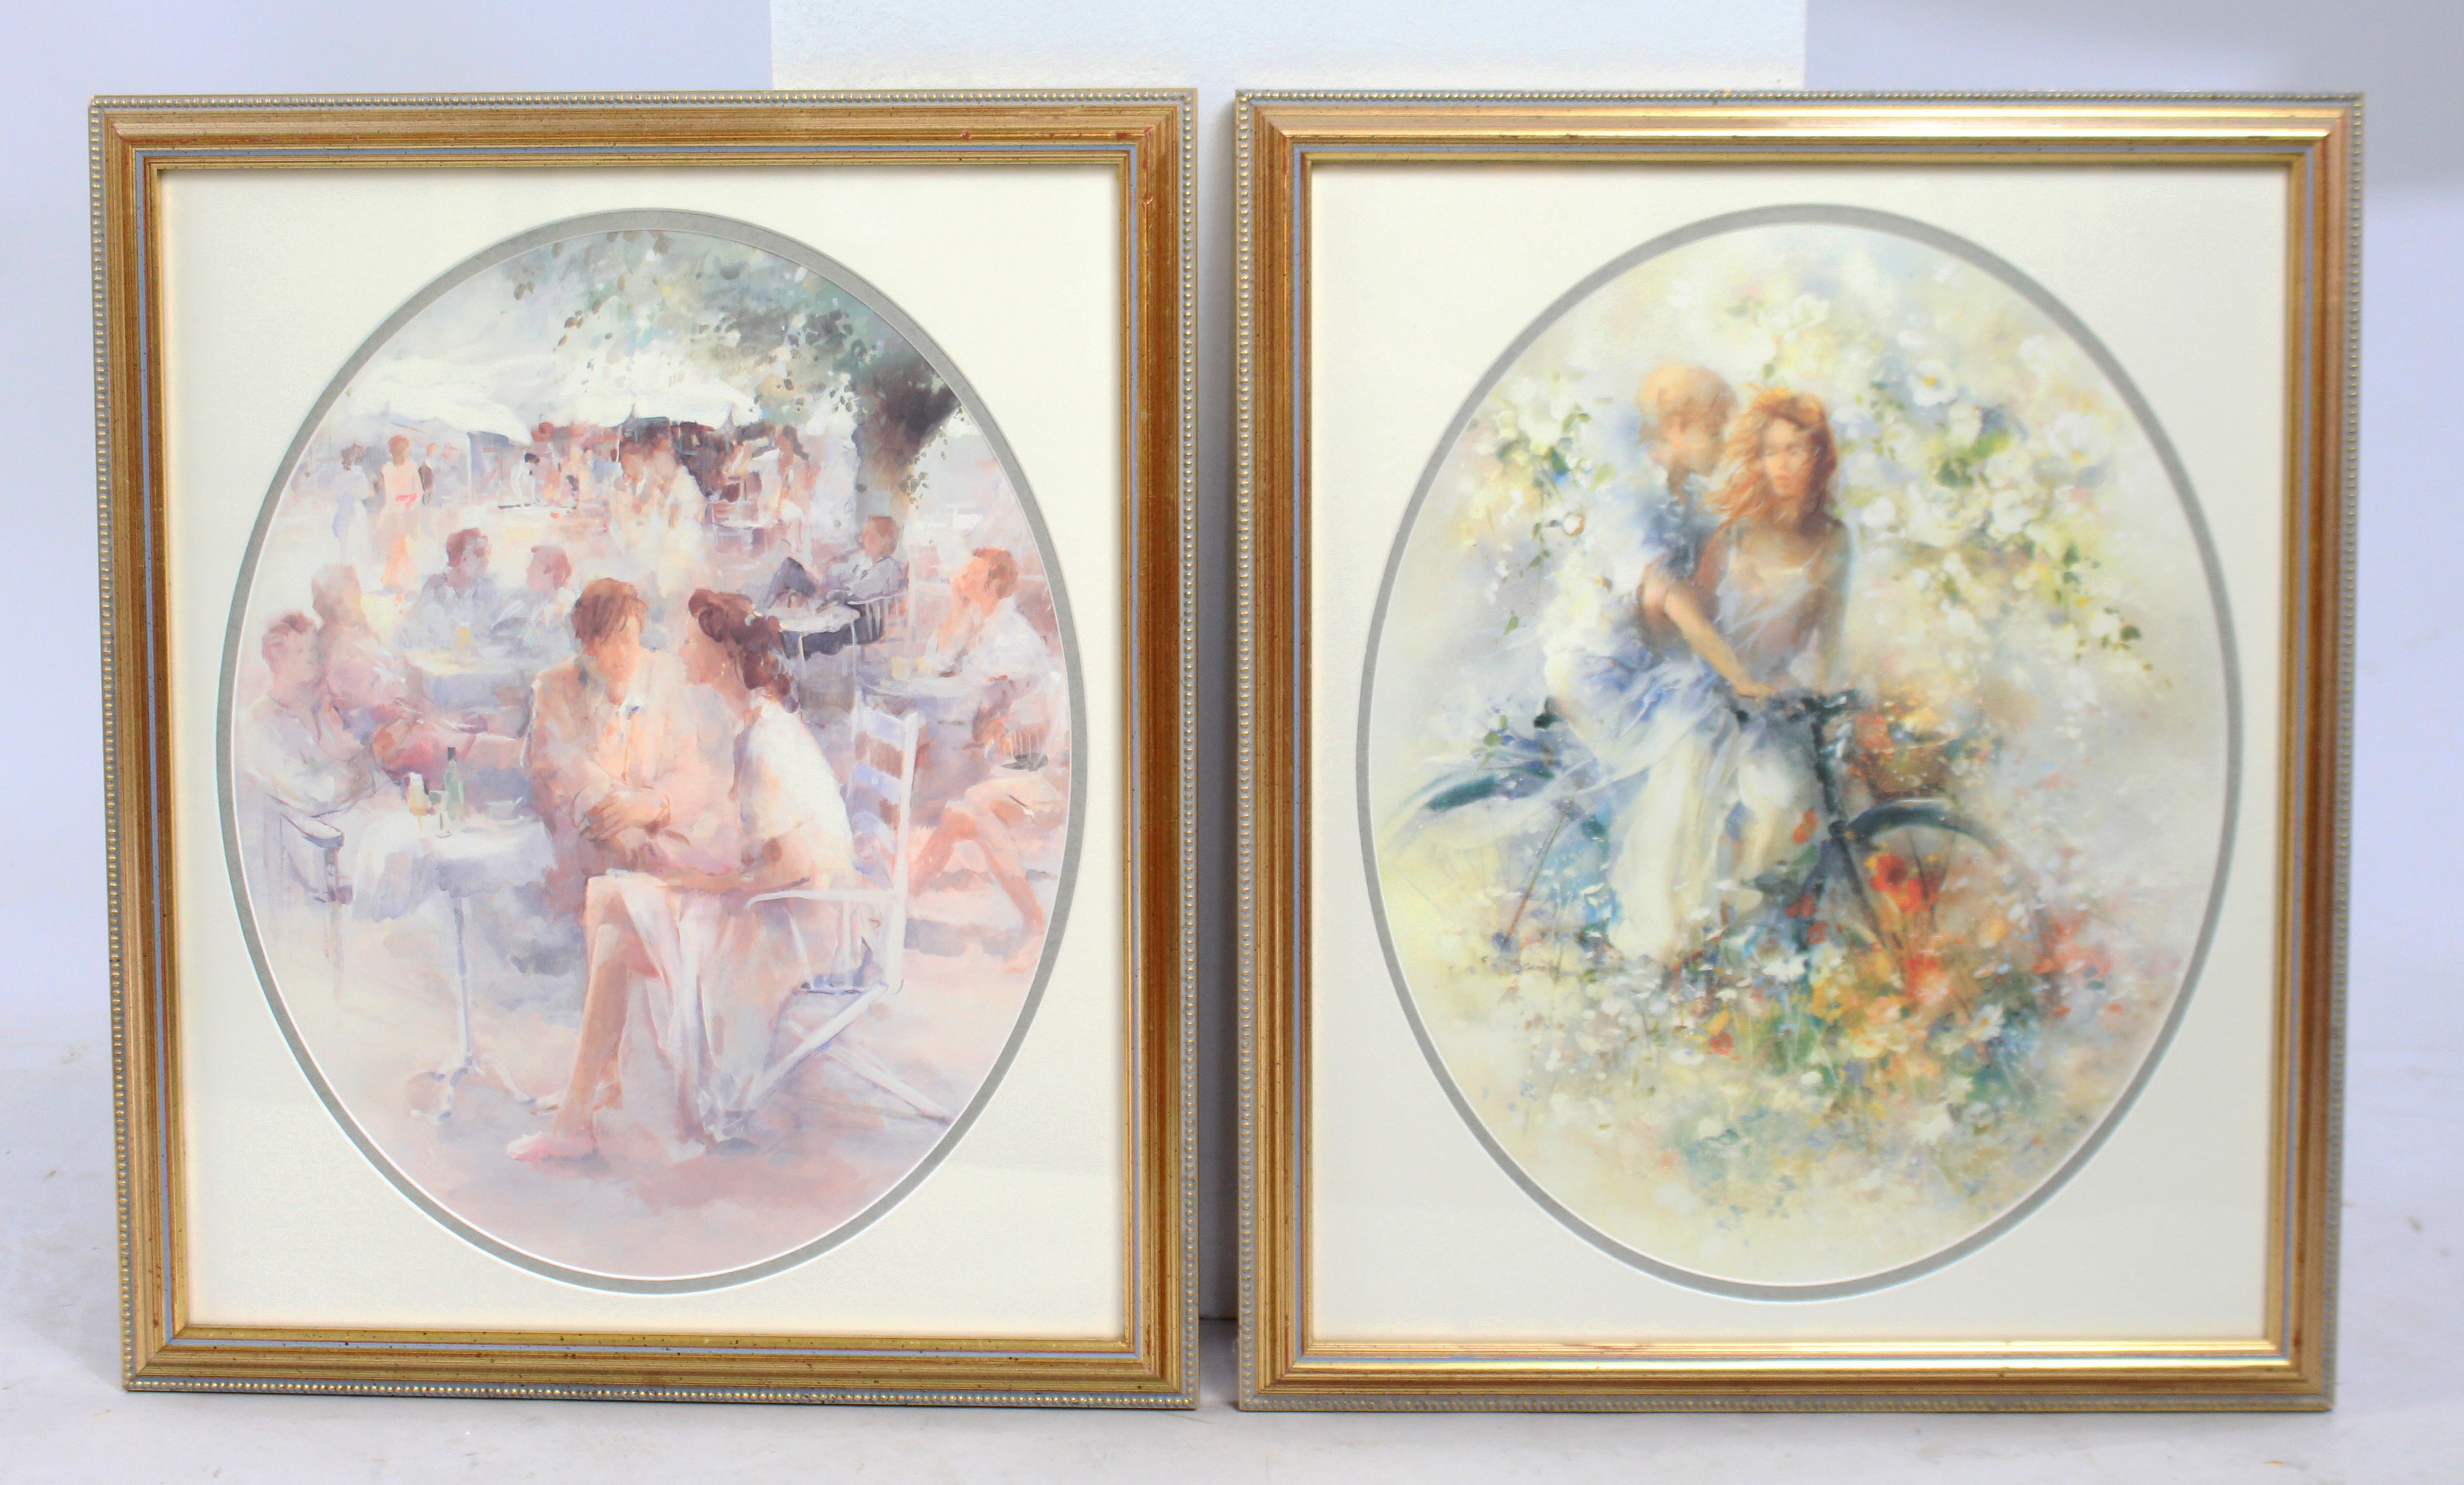 Pair of Oval Prints Mounted & Set in Gilt Frames